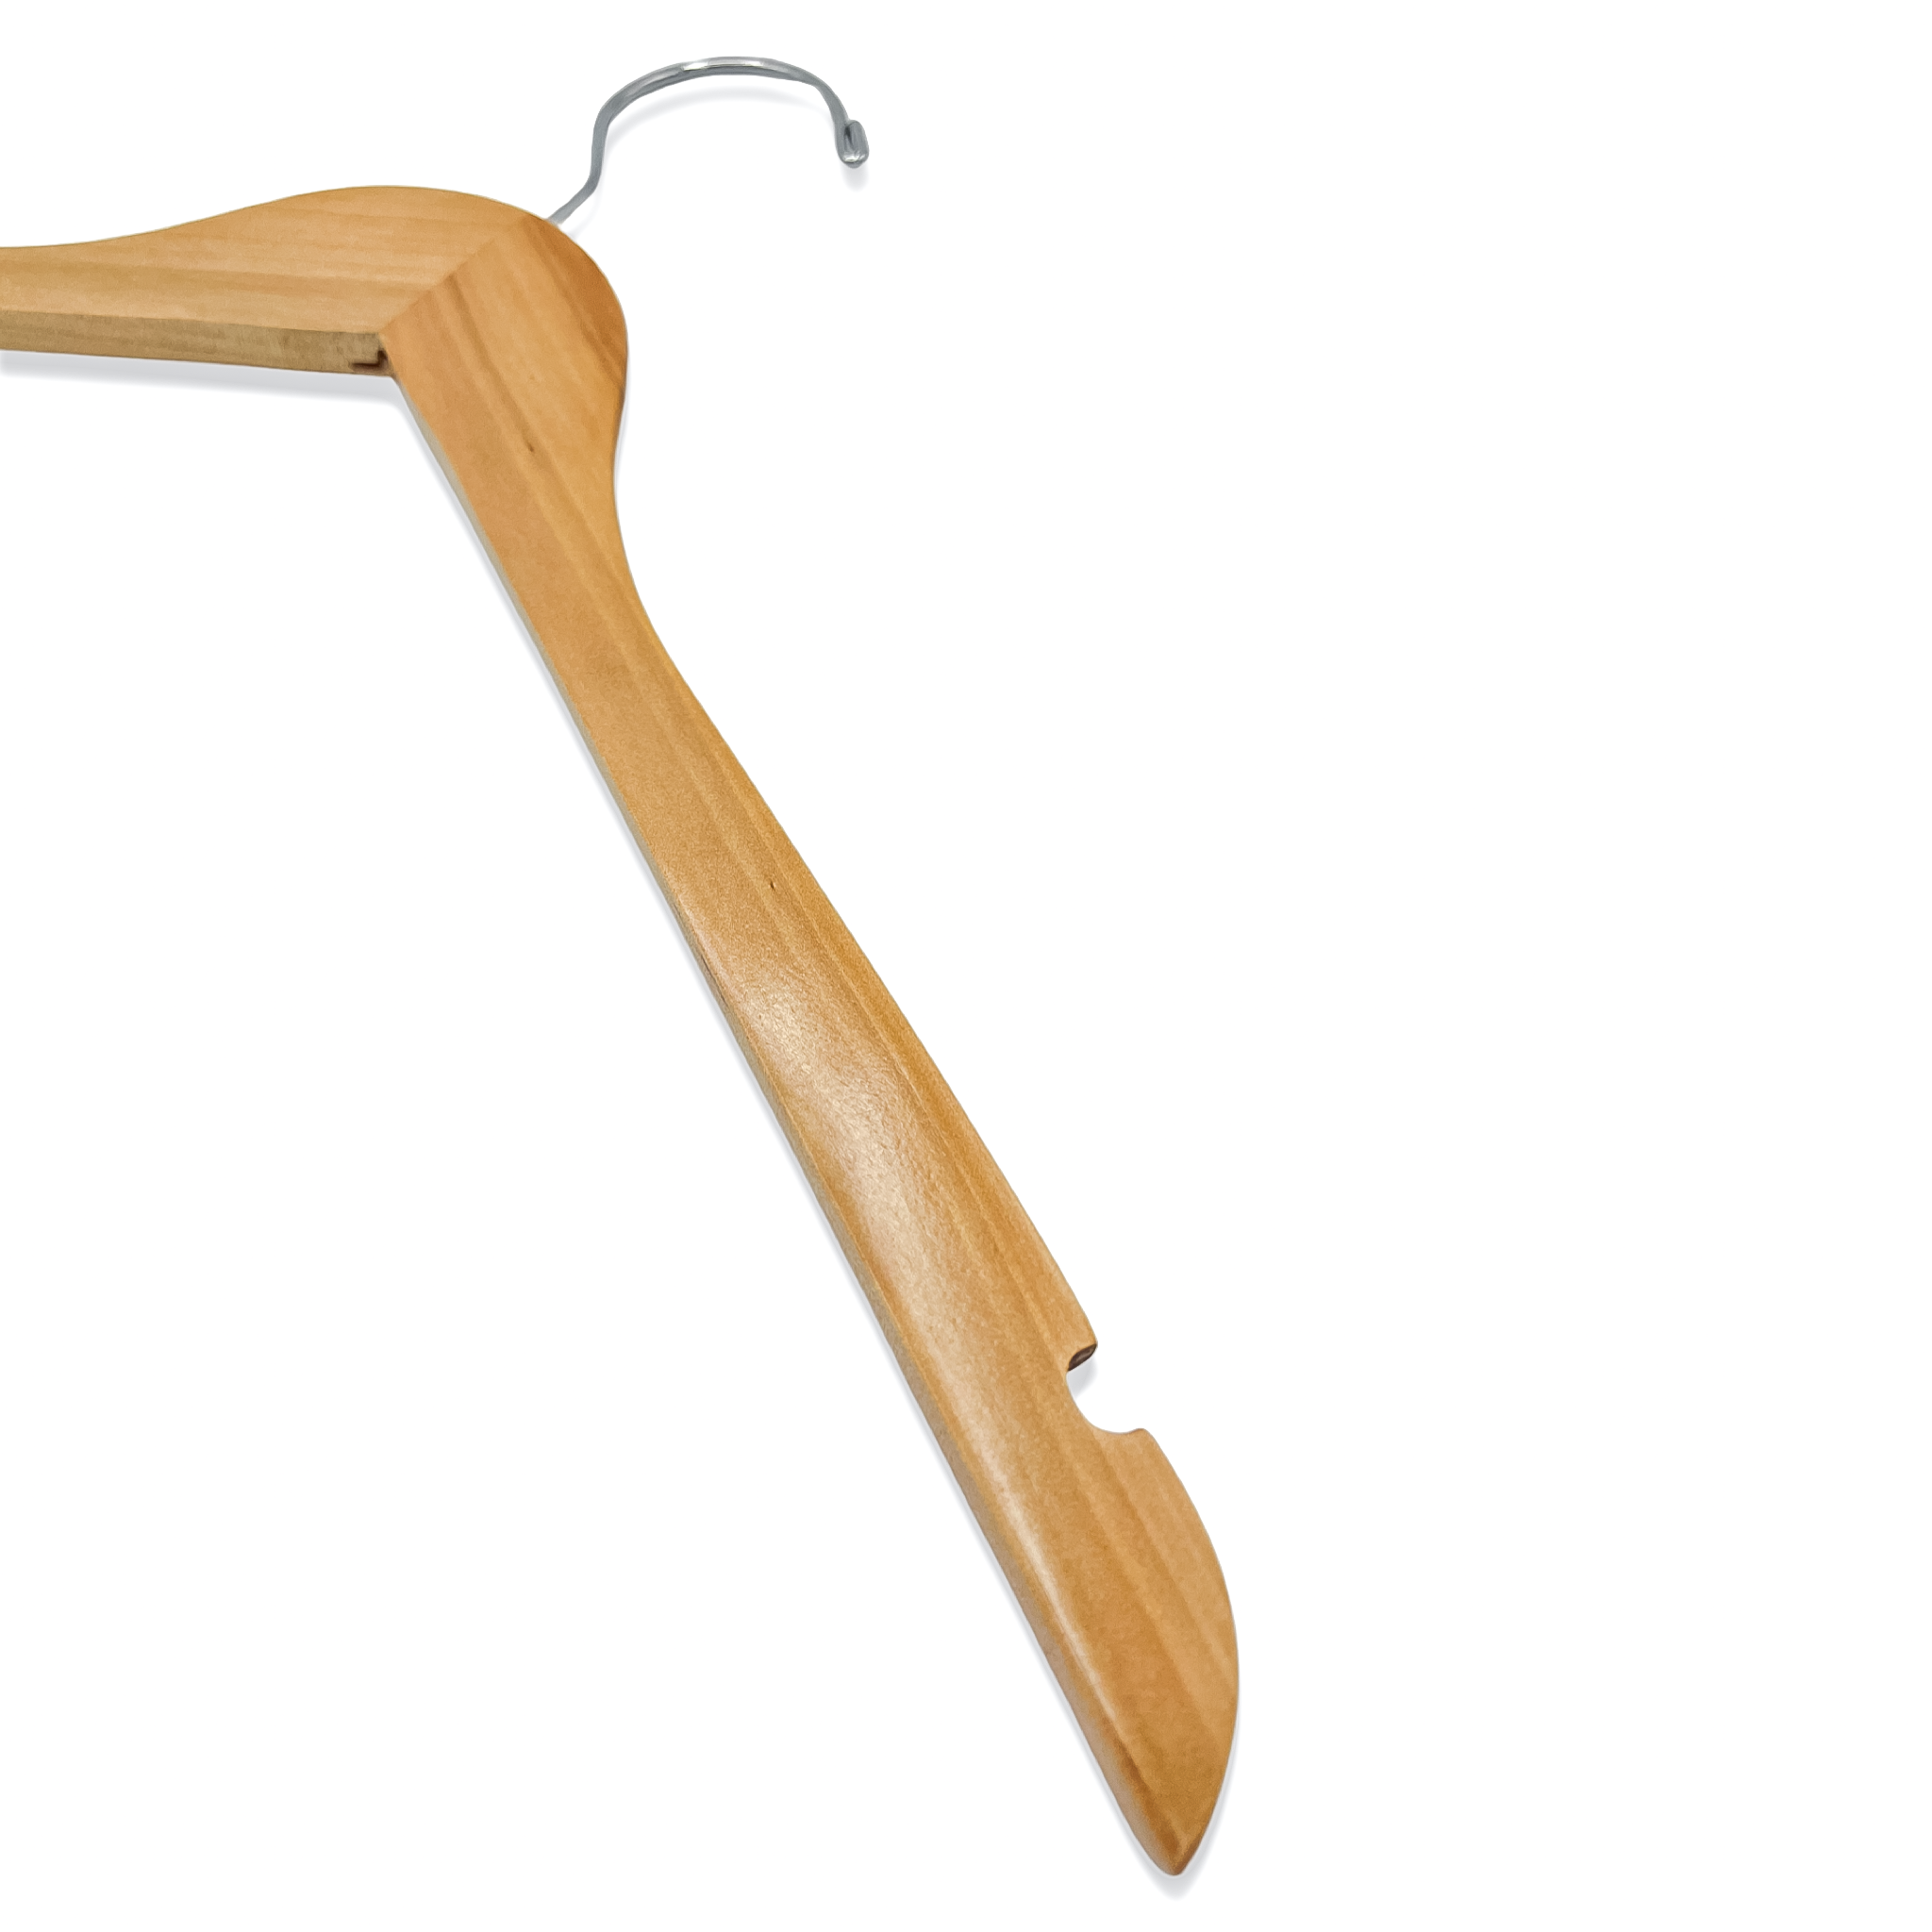 The arm of a Natural Solid Maple Wood Clothes Hanger with a shoulder notch lying down